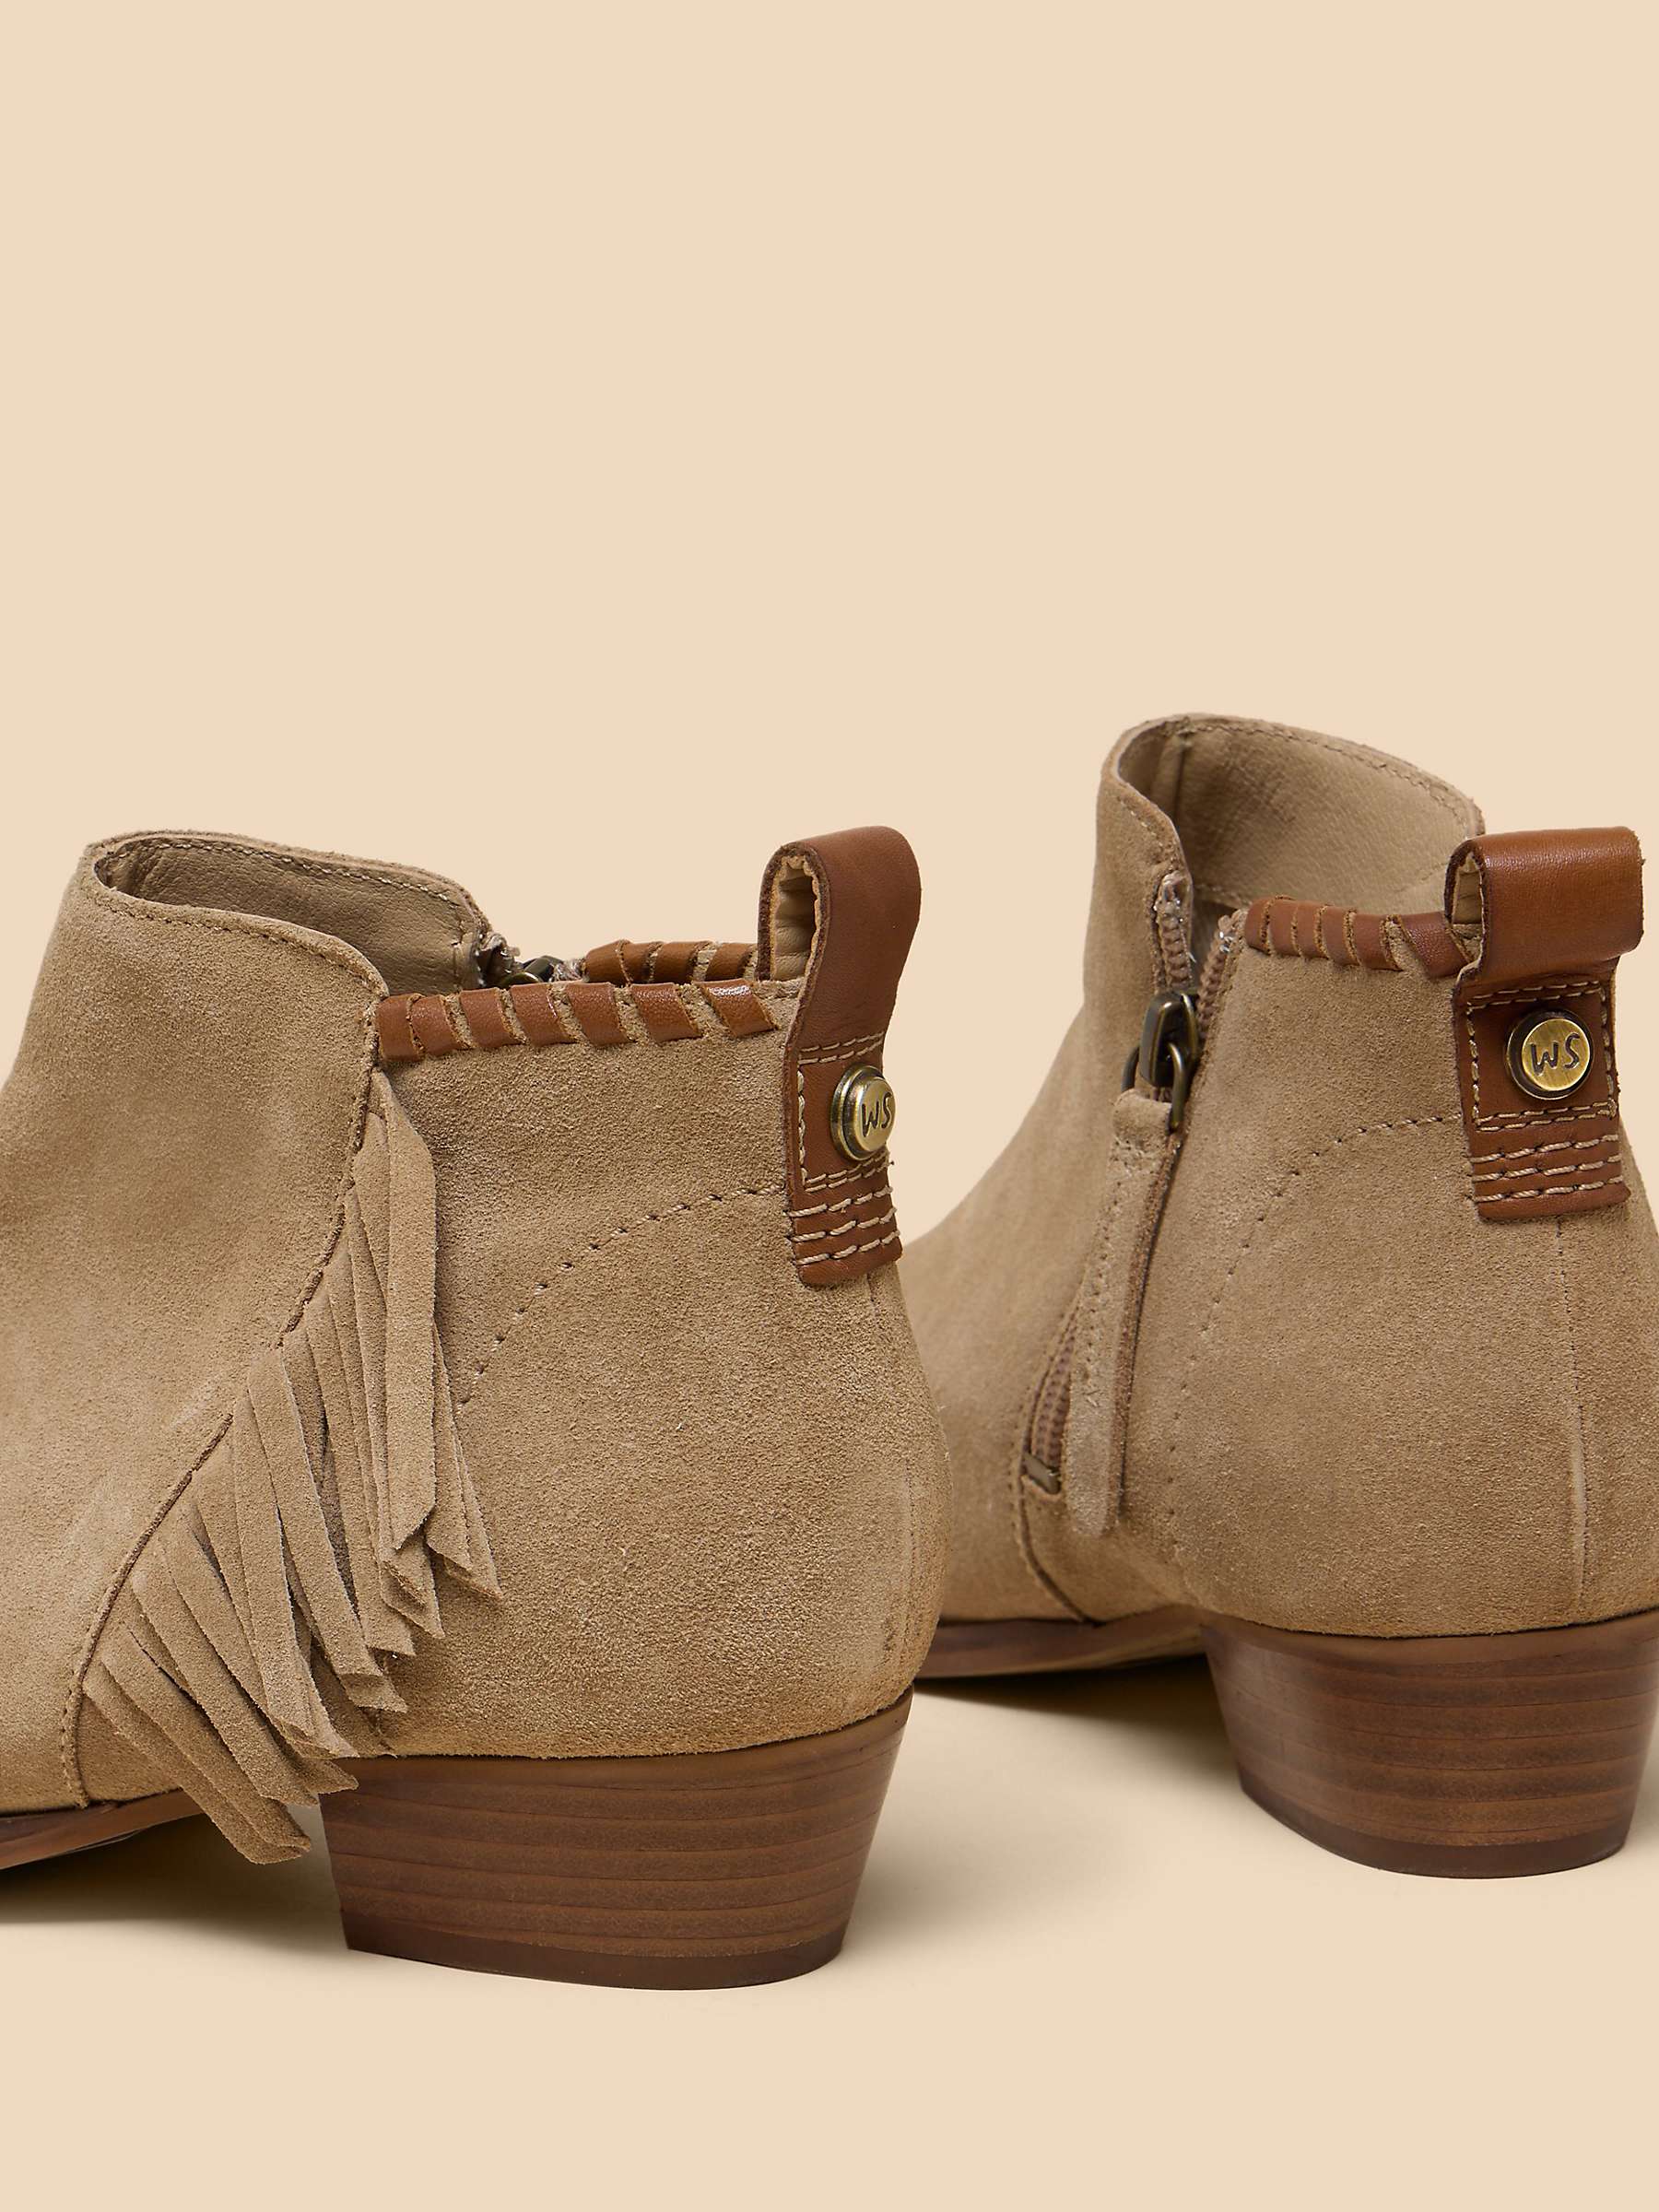 Buy White Stuff  Acacia Suede Fringe Ankle Boots, Light Natural Online at johnlewis.com